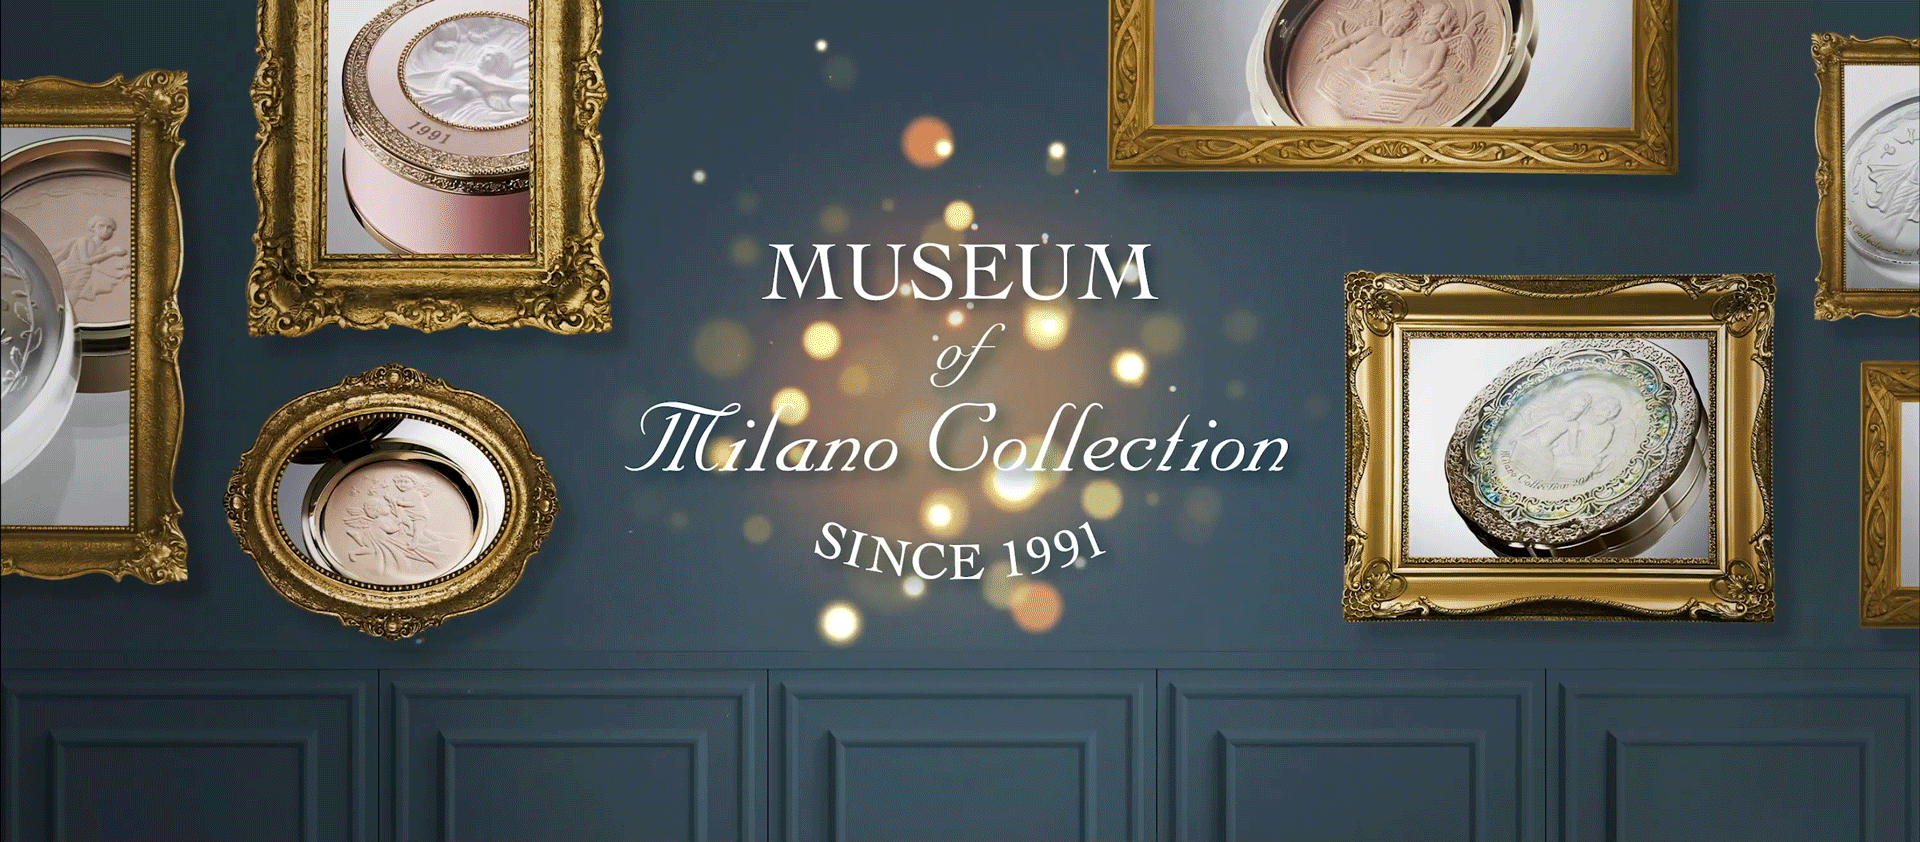 MUSEUM of Milano Collection SINCE 1991